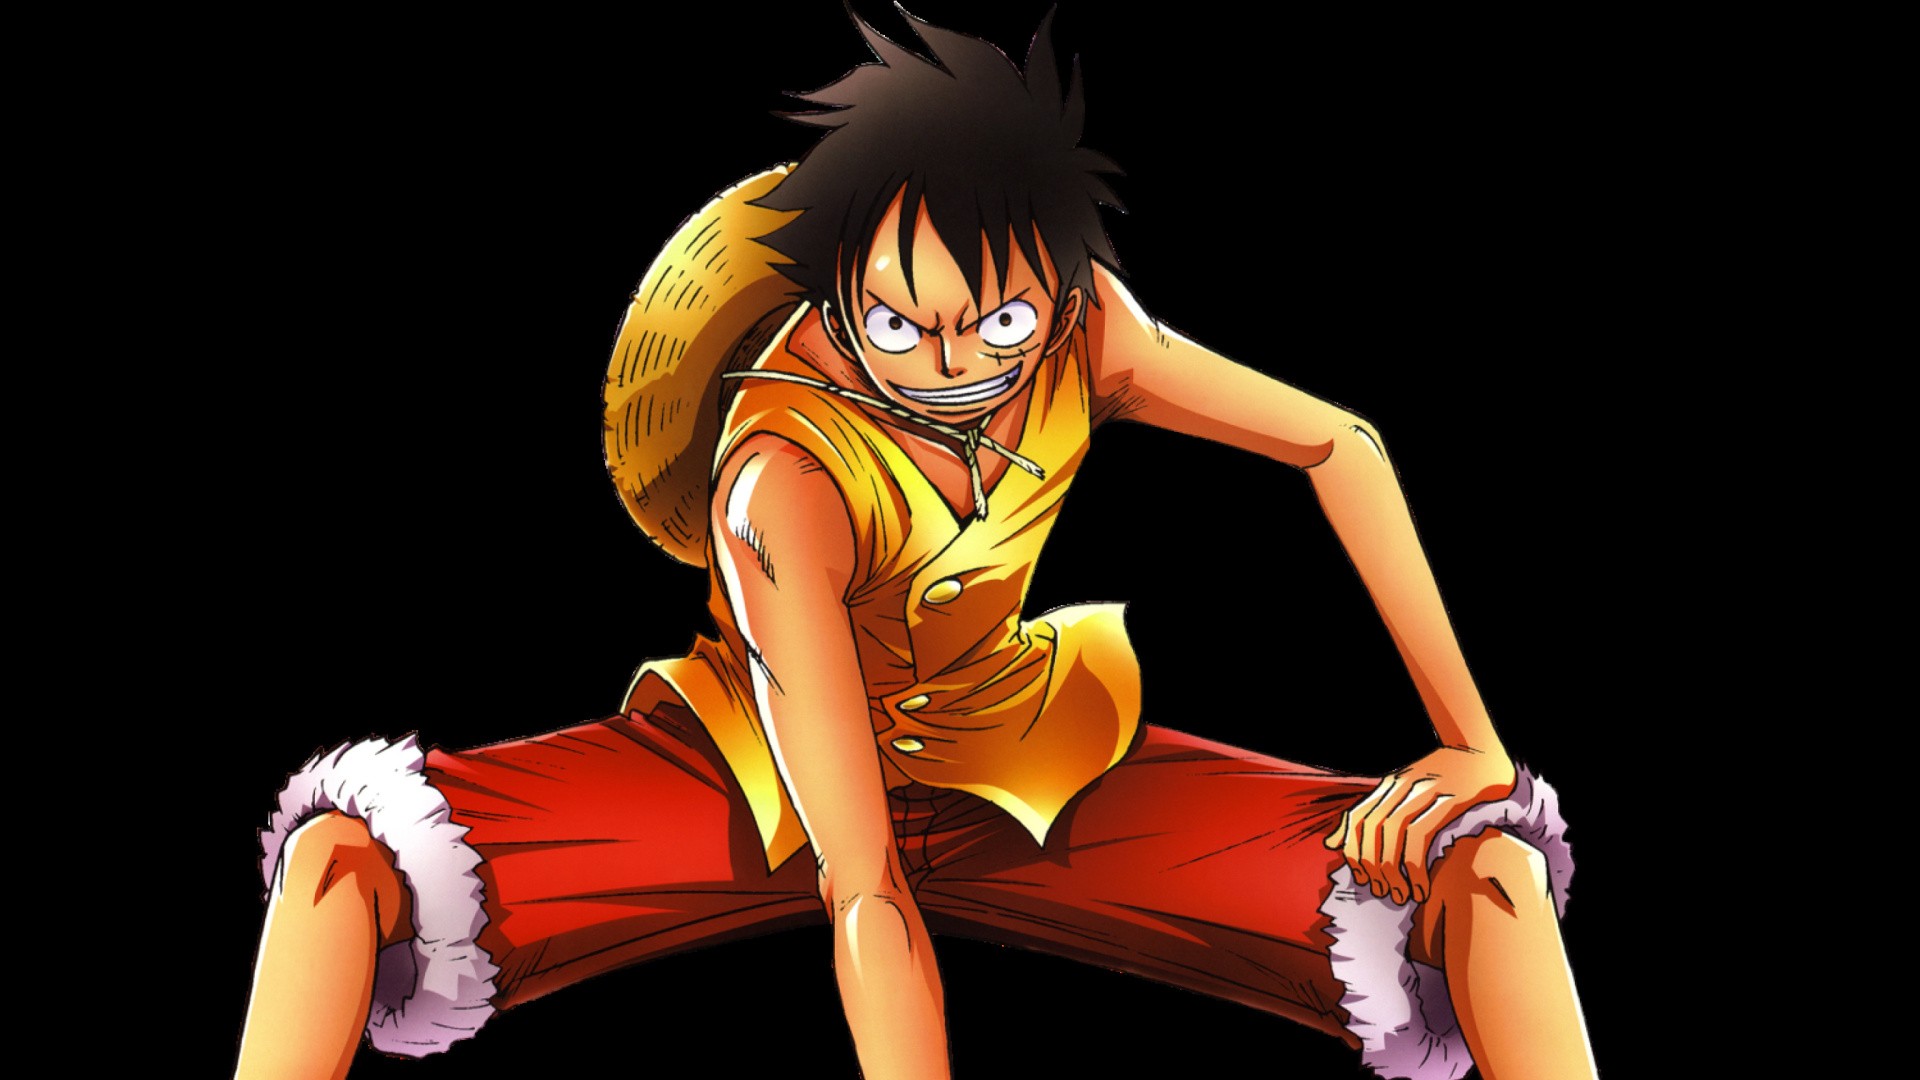 New One Piece Game Release Possibility Sores as Fan Demand Grows High